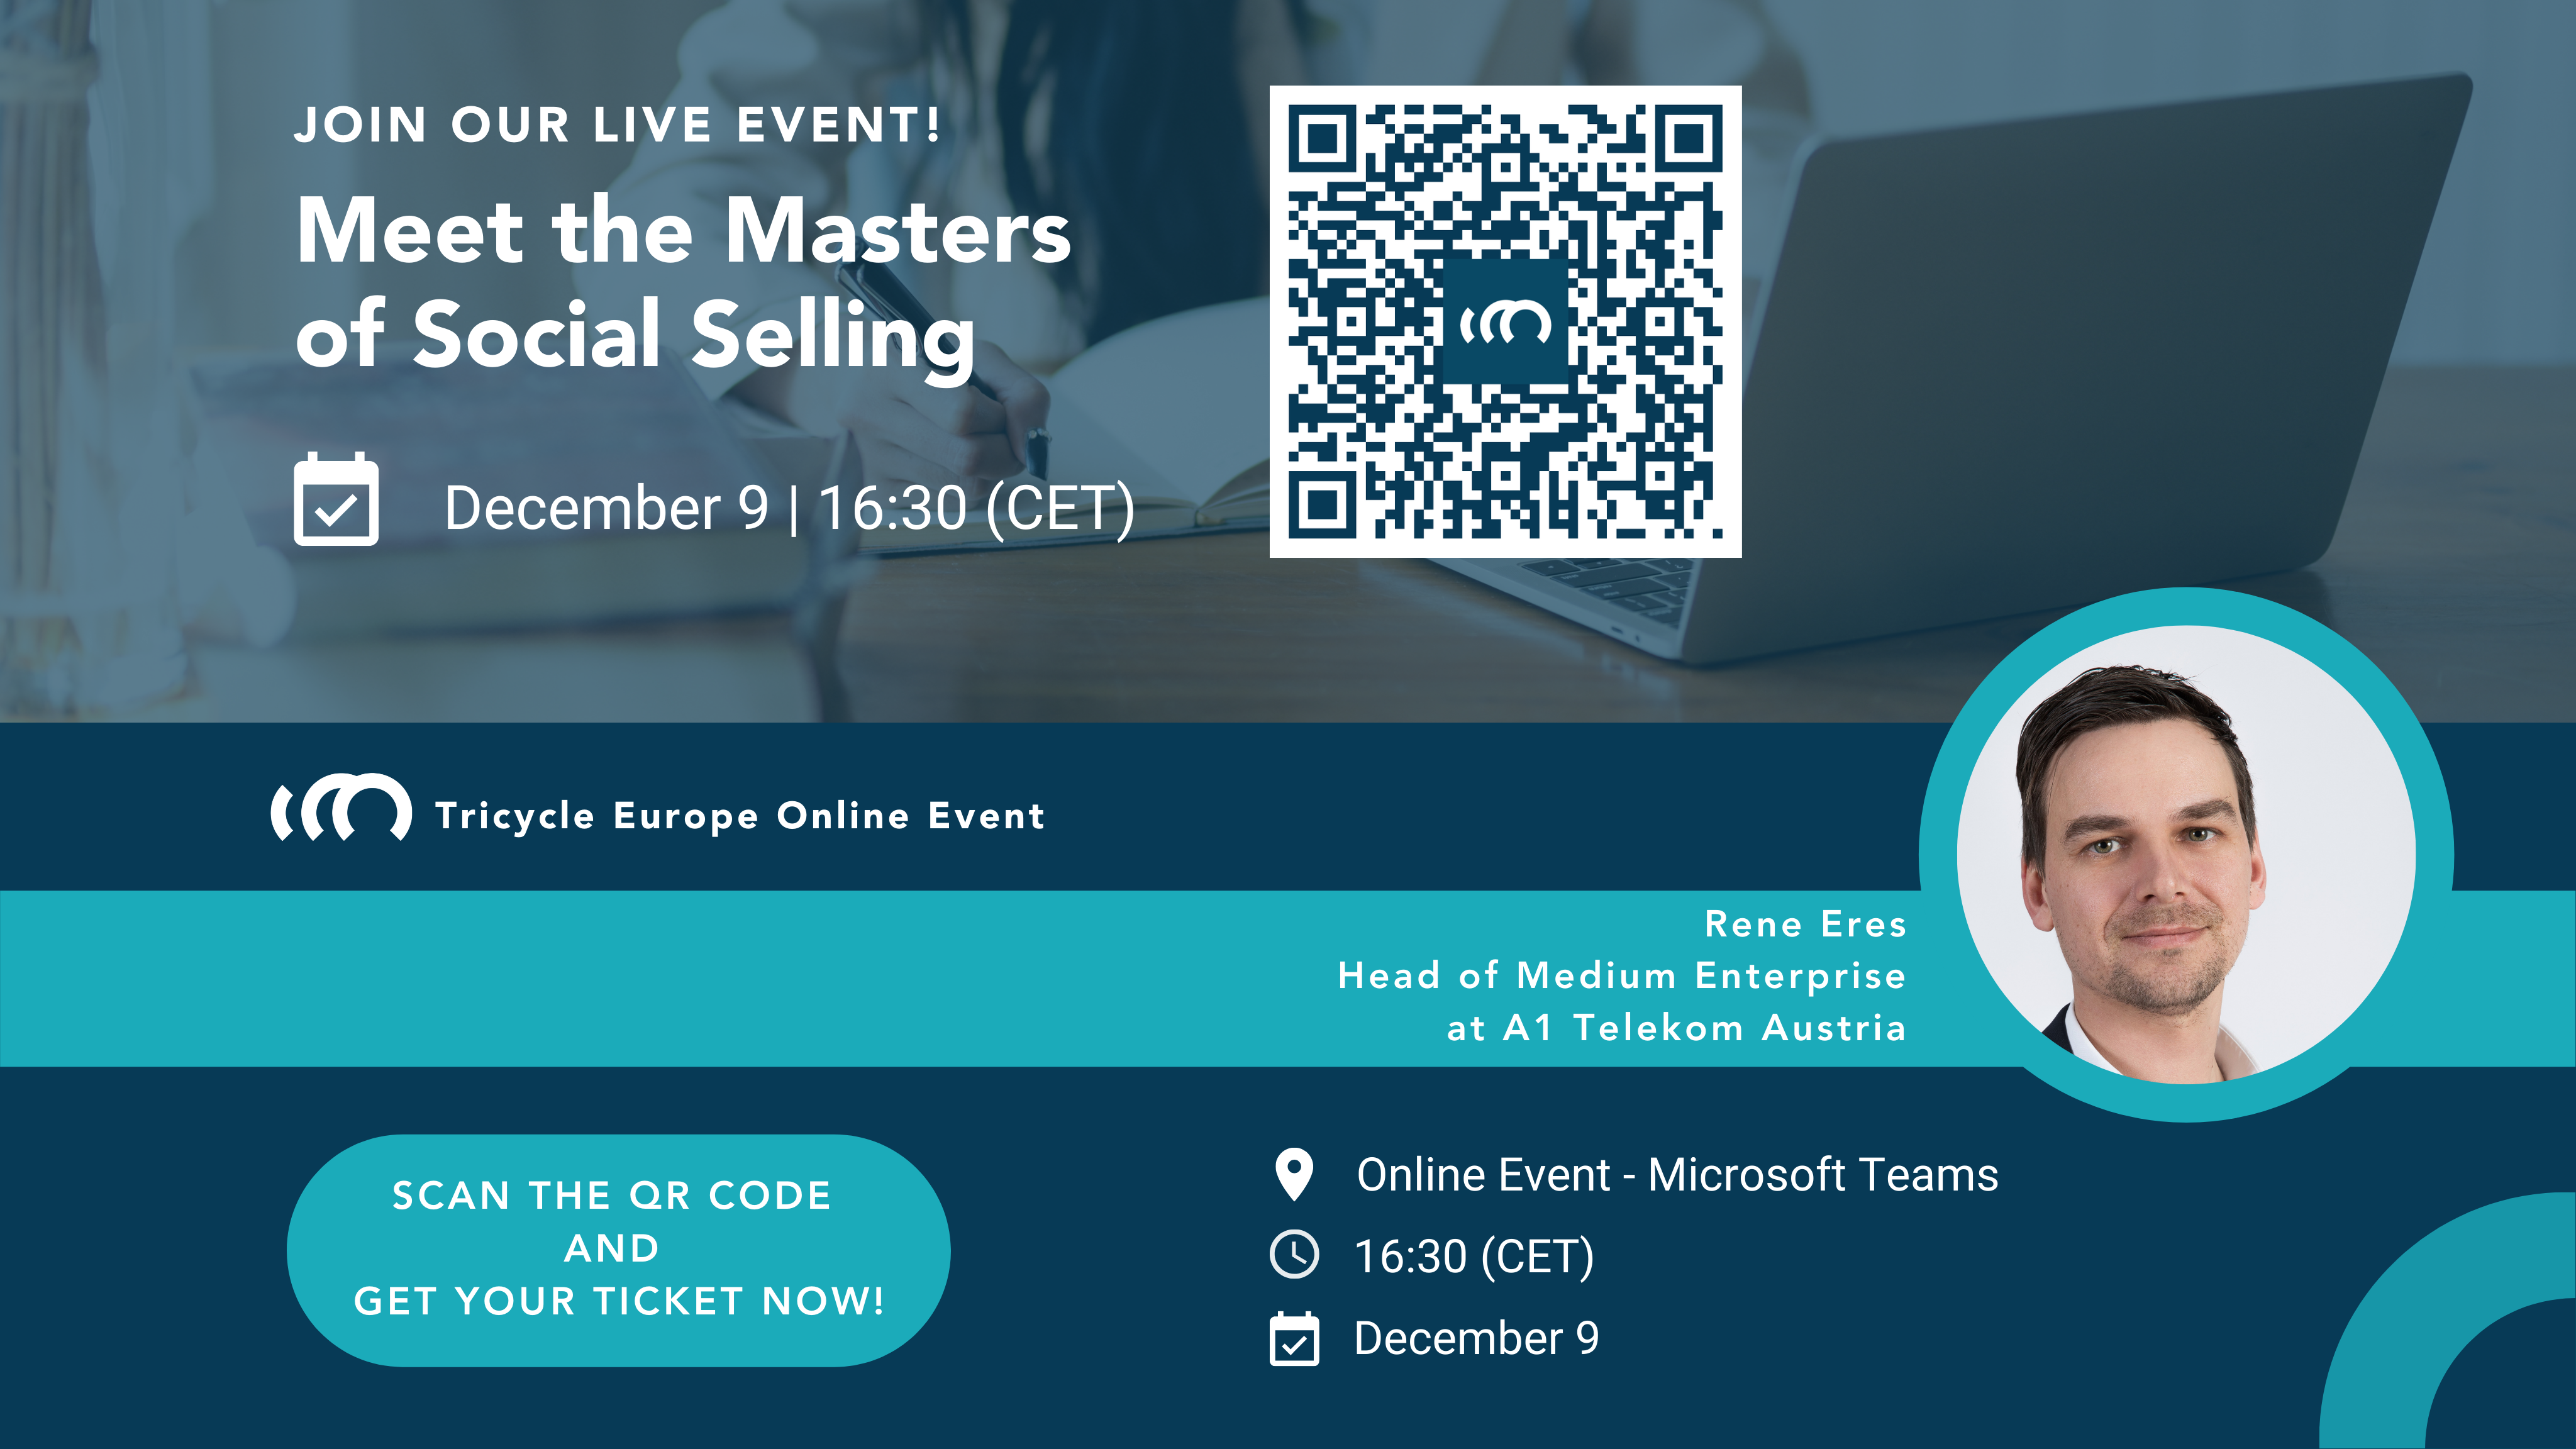 Meet the Masters of Social Selling by Tricycle Europe